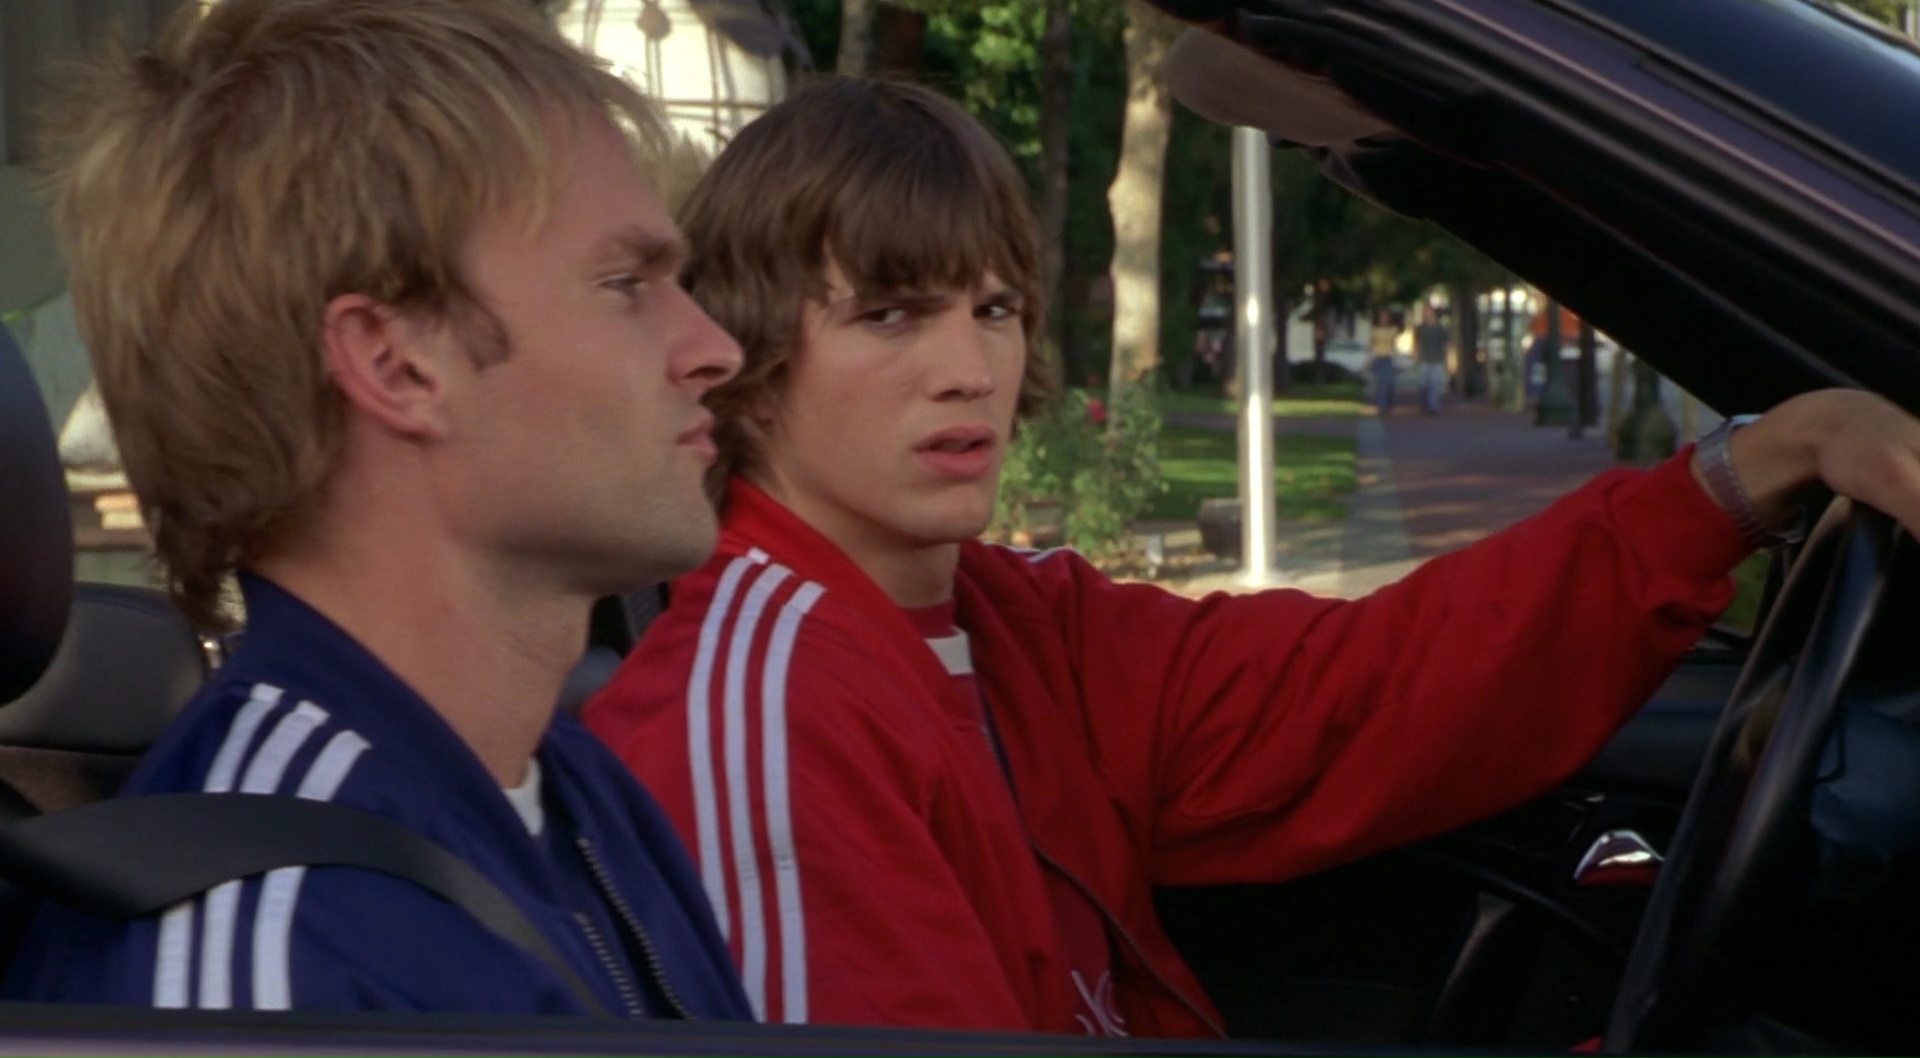 Adidas Track Suits - Dude, Where's My Car? (2000) Movie1920 x 1058